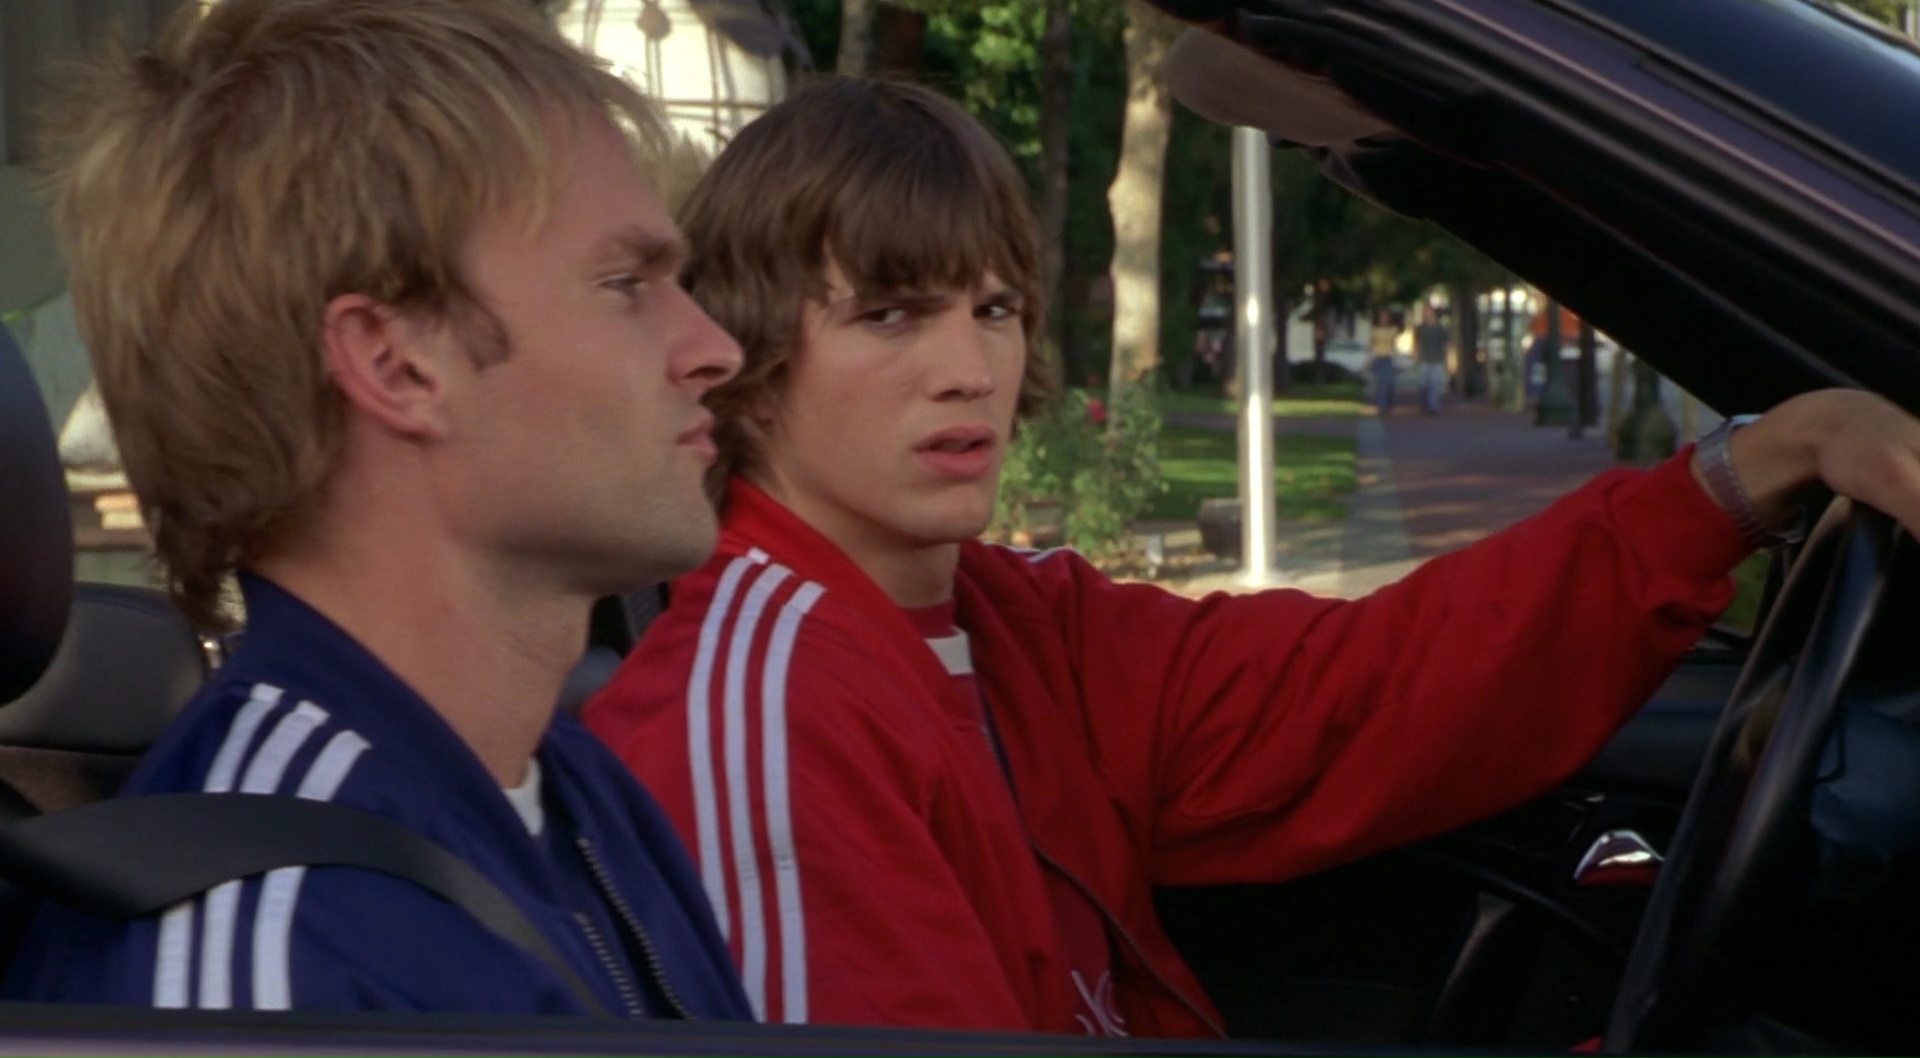 Adidas Track Suits - Dude, Where's My Car? (2000) Movie1920 x 1058